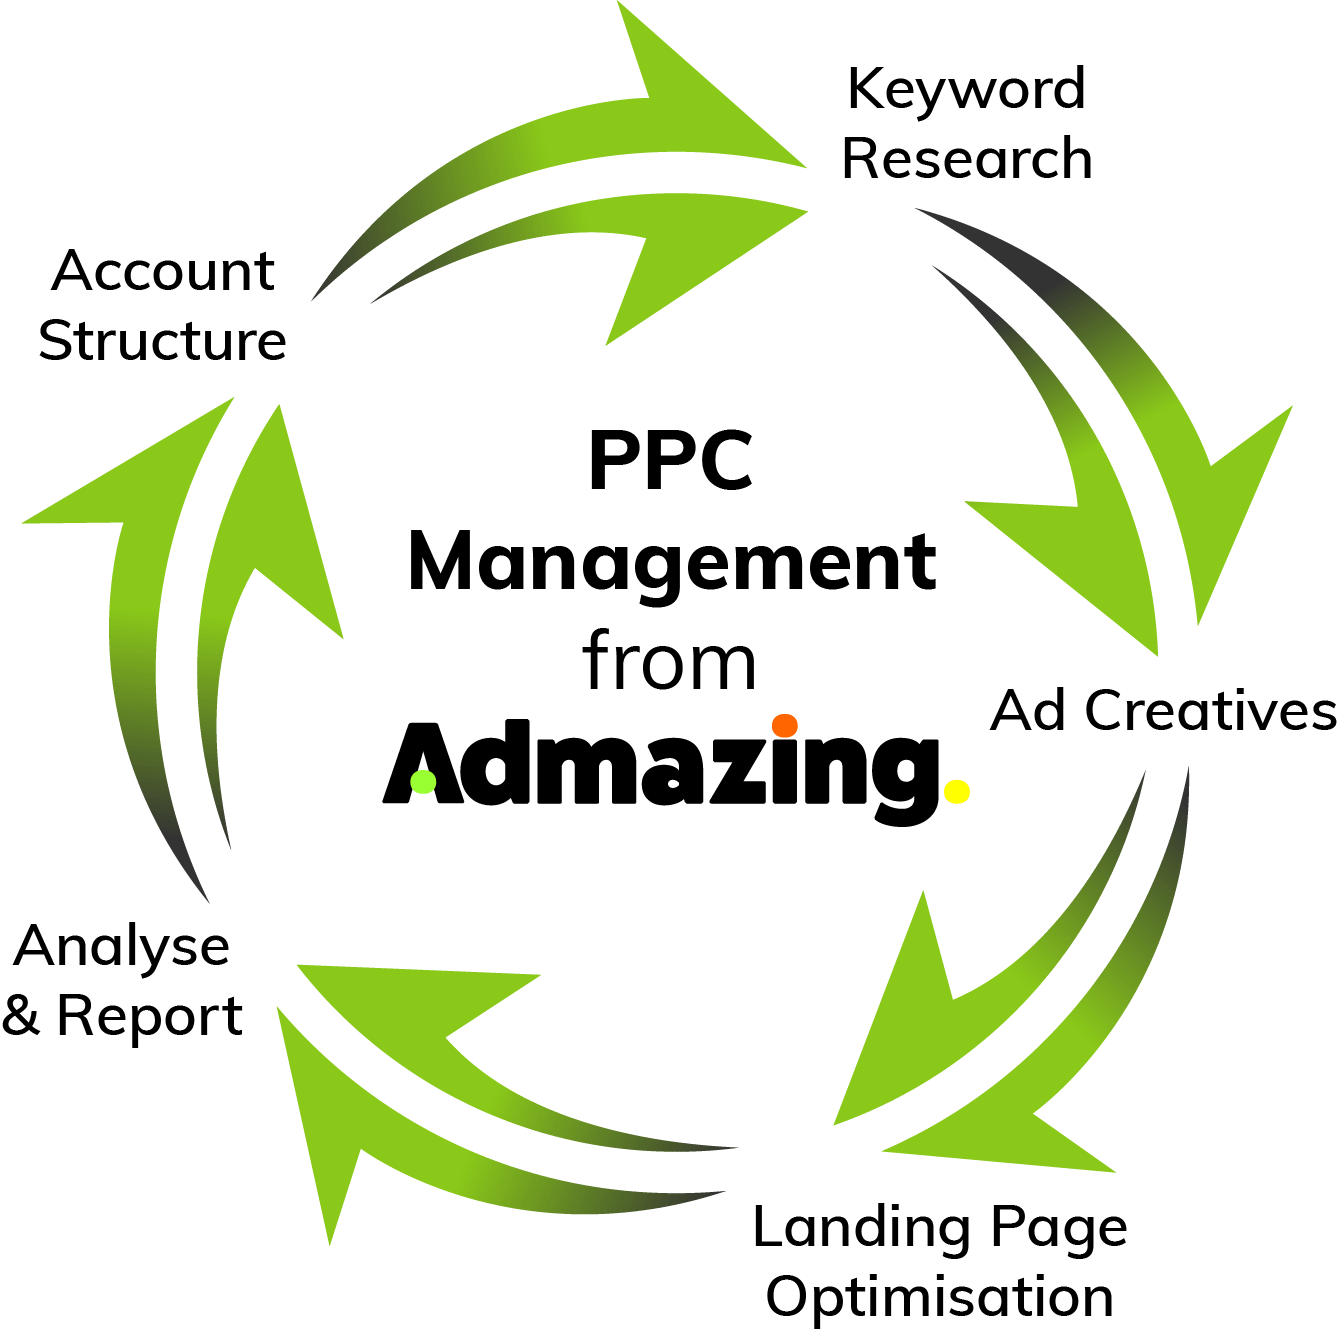 How Admazing's PPC Management Works